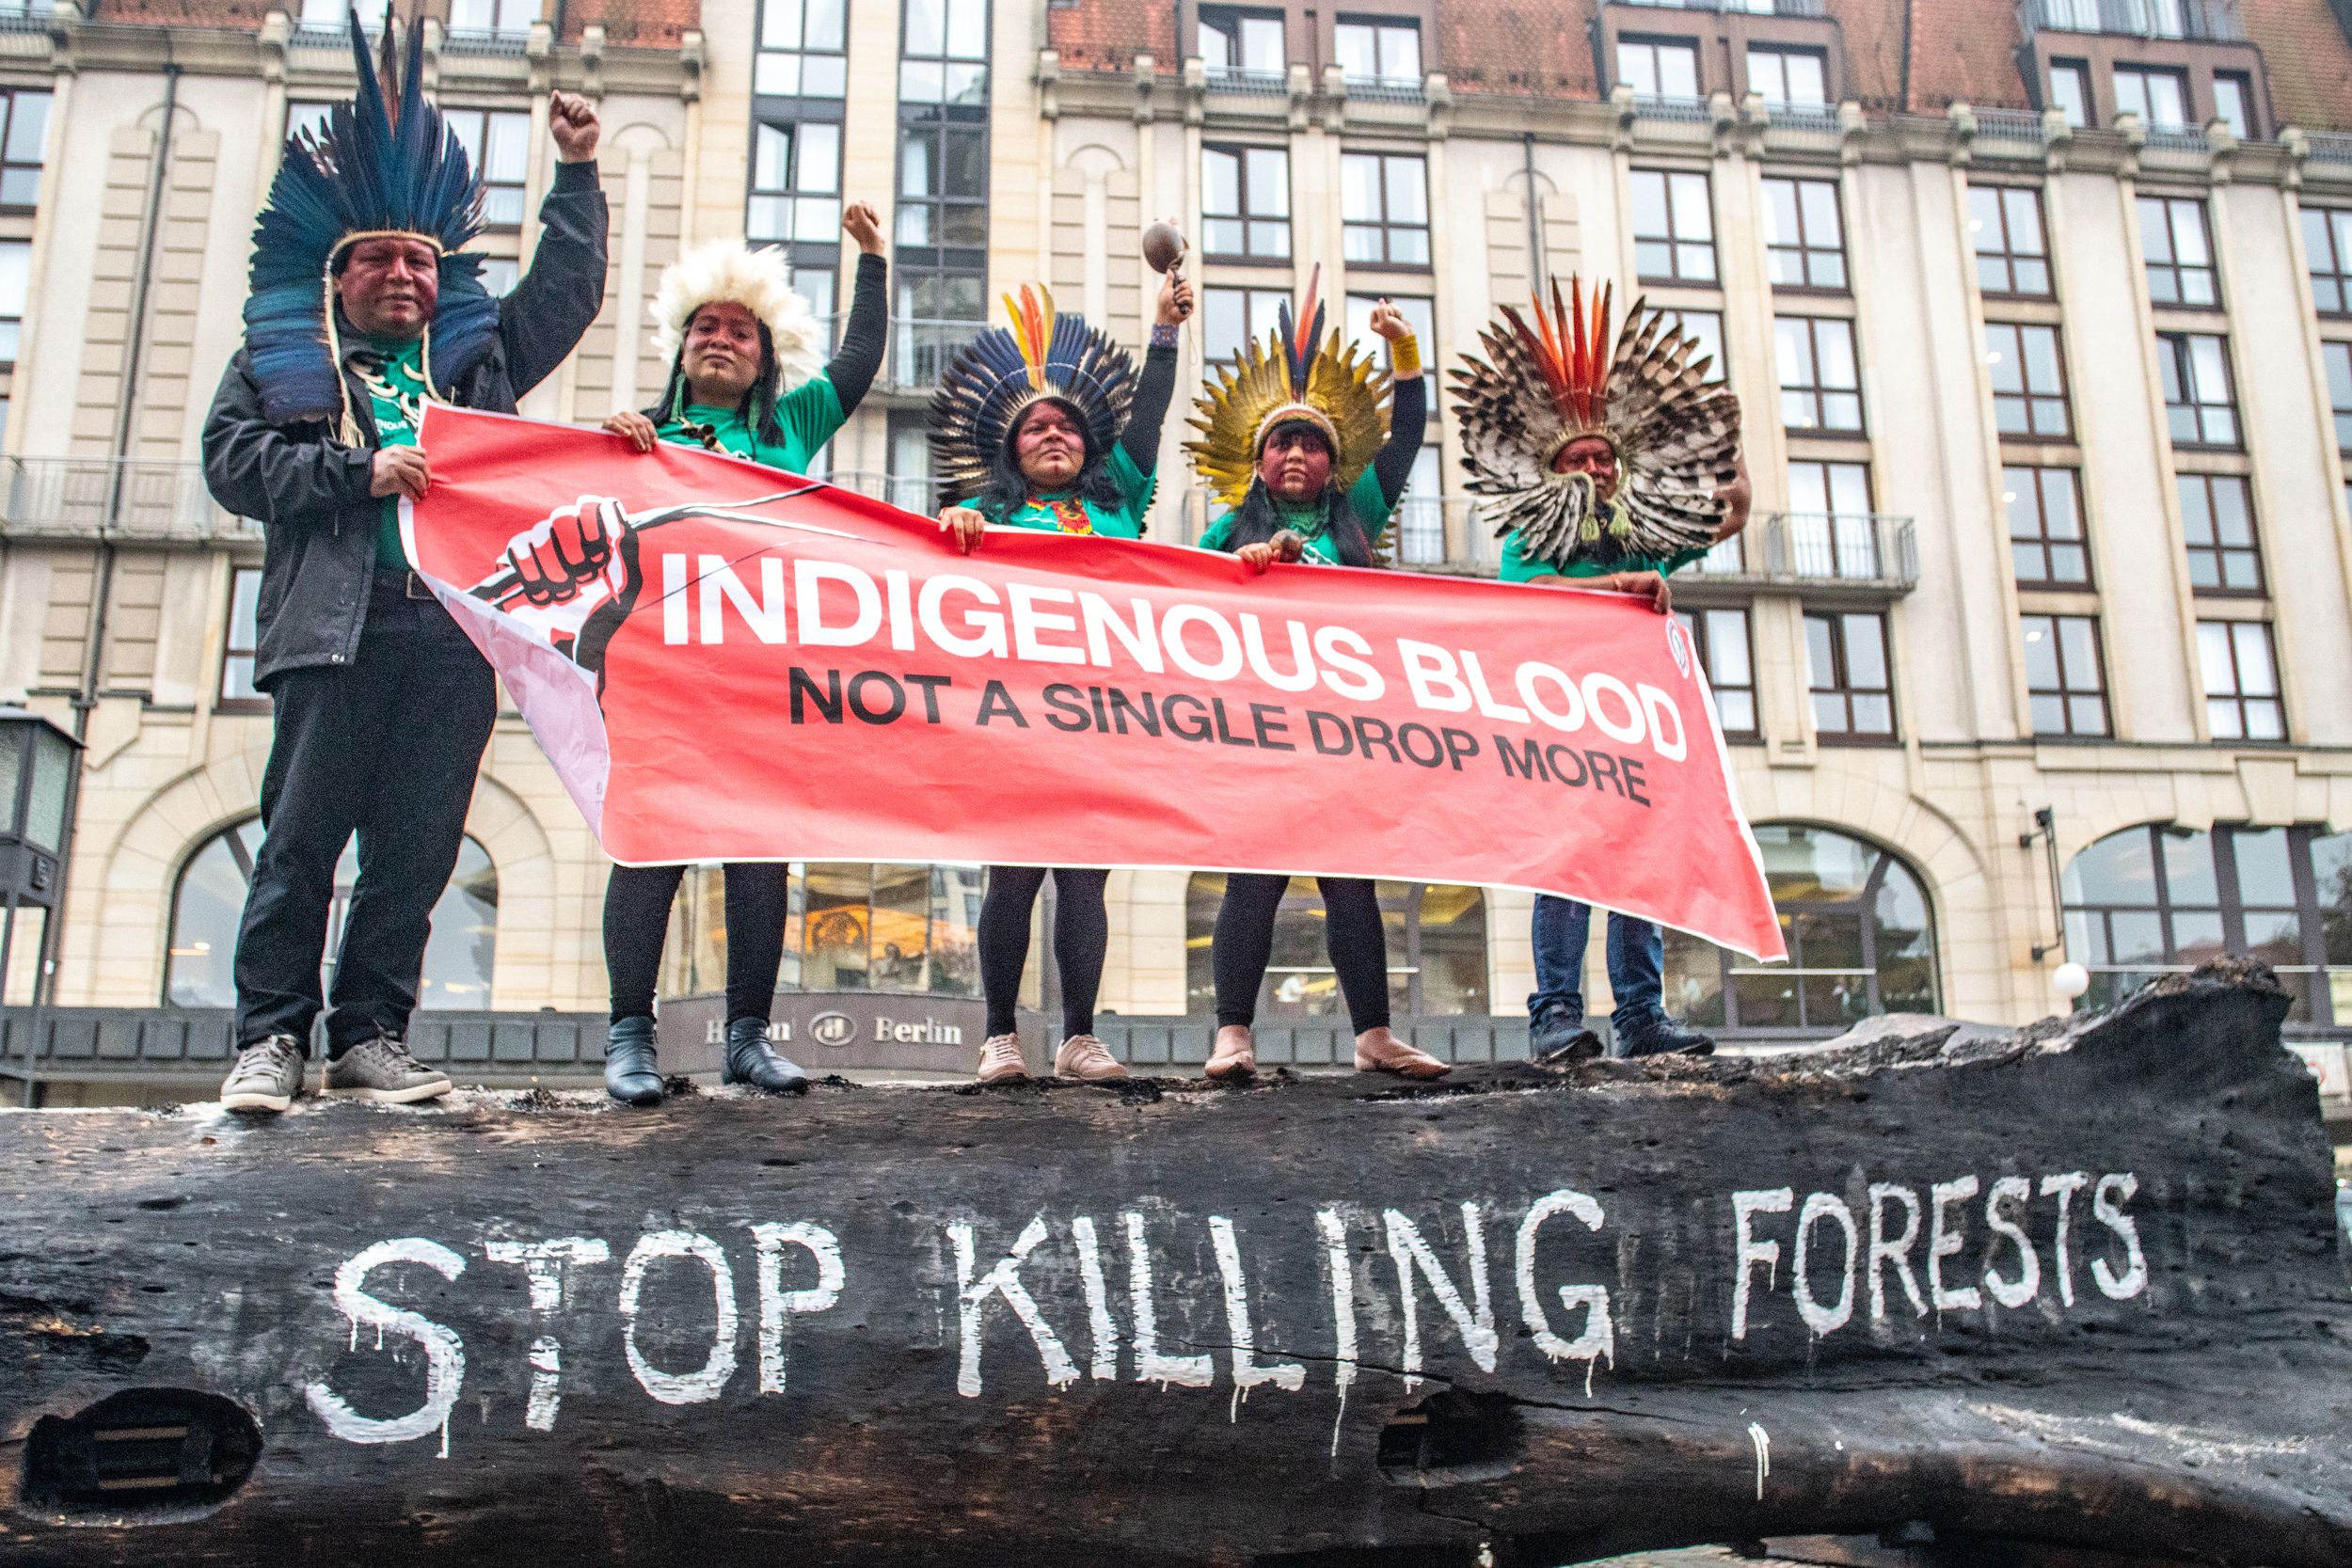 Five people hold a large banner reading 'Indigenous blood: not a single drop more'. Fists raised defiantly in the air, they're wearing feathered headdresses typical of the Indigenous Peoples of the Amazon.